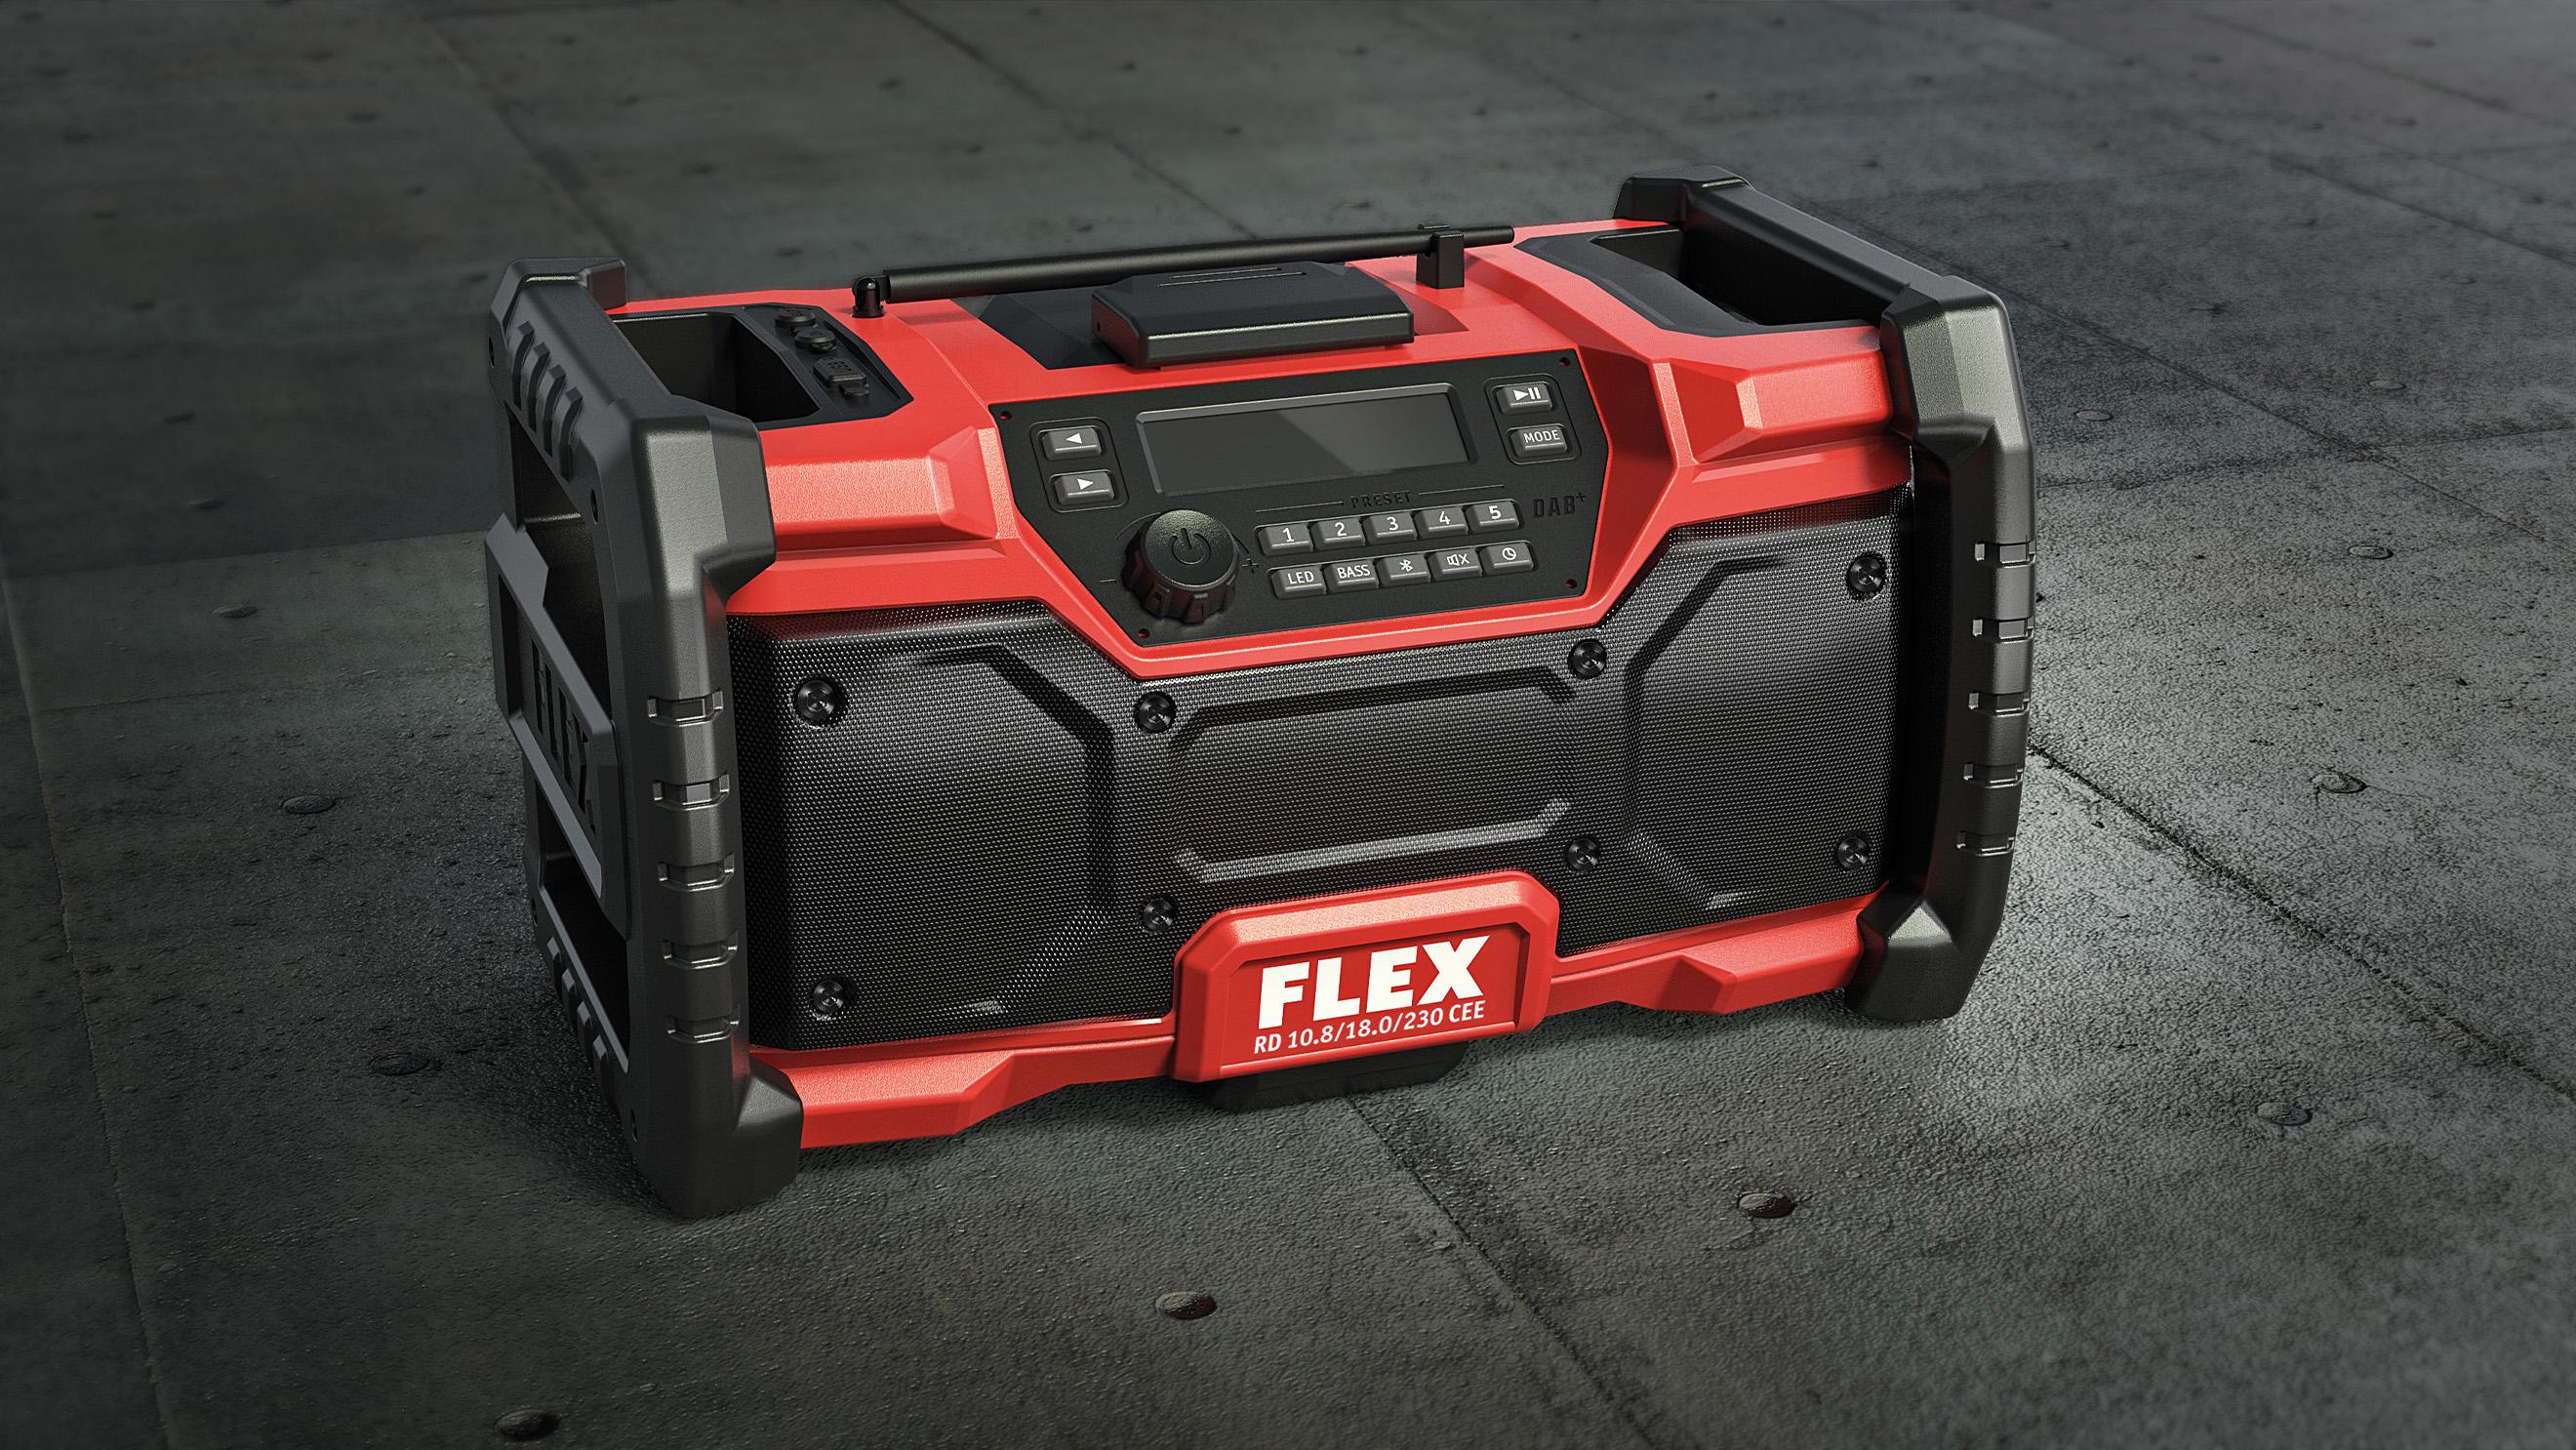 Music on the construction site with the FLEX cordless construction site radio